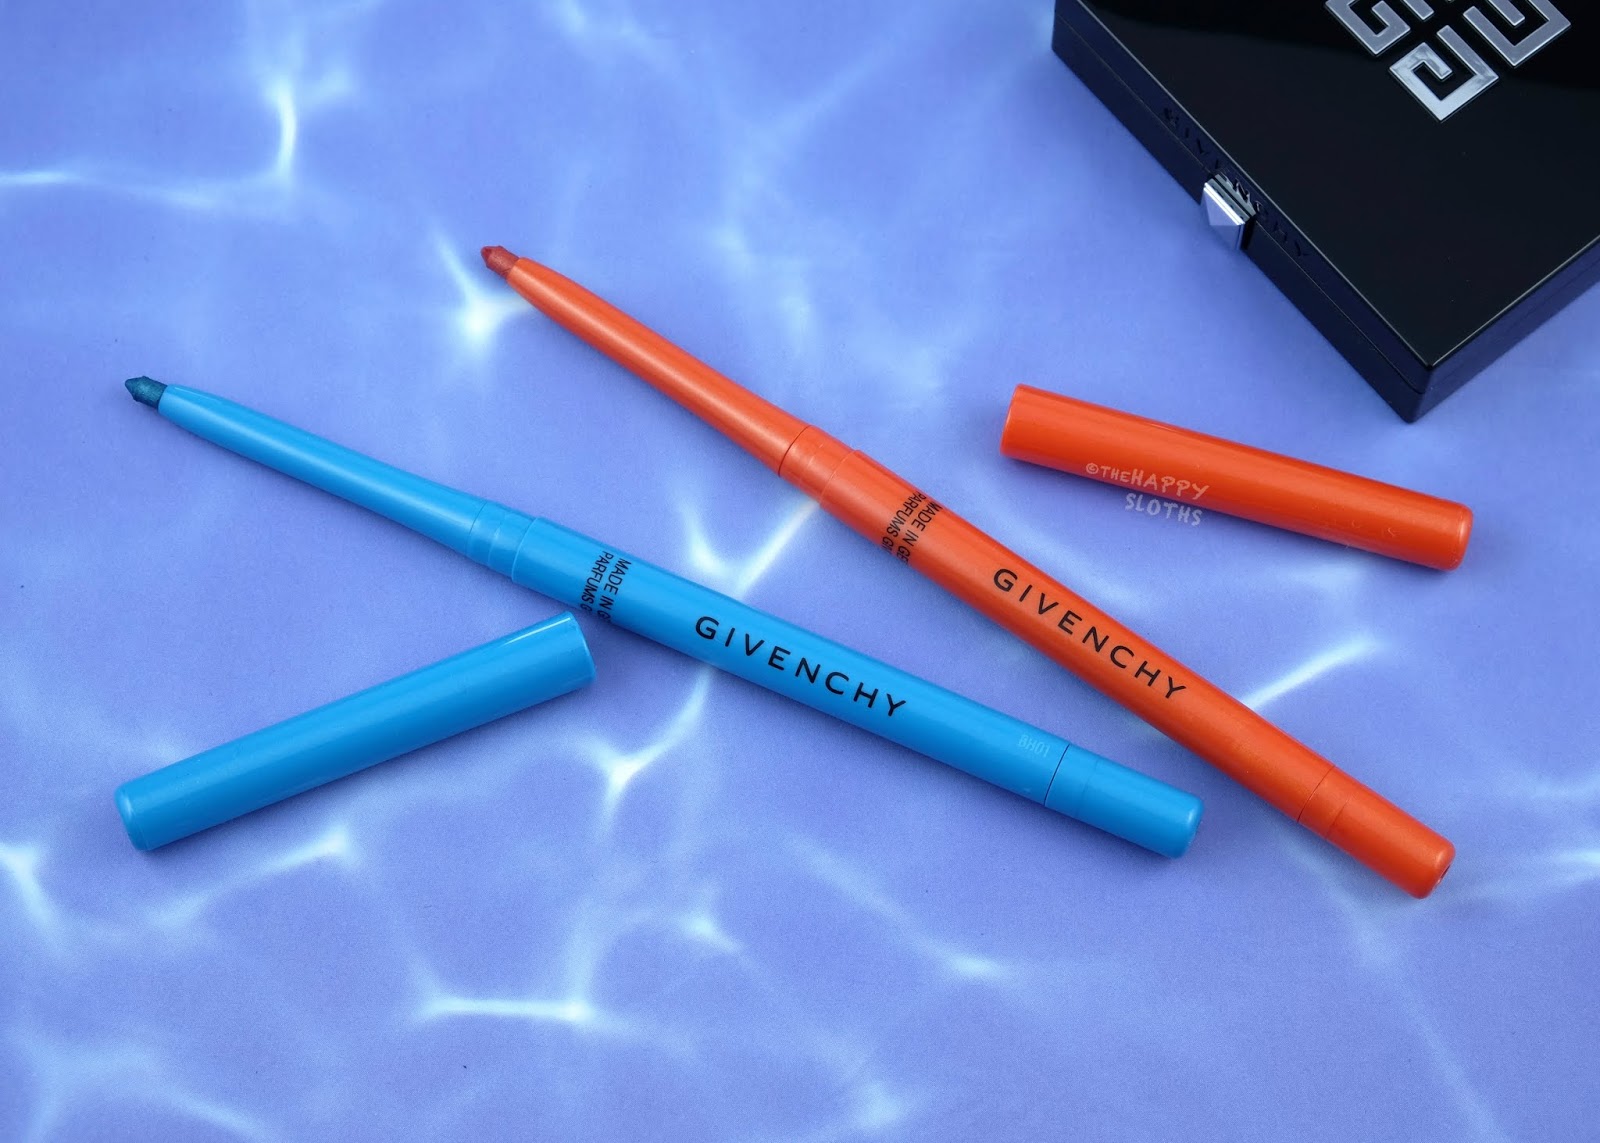 Givenchy |  Summer 2019 Khol Couture Waterproof Retractable Eyeliner in "09 Tangerine" & "10 Azur": Review and Swatches